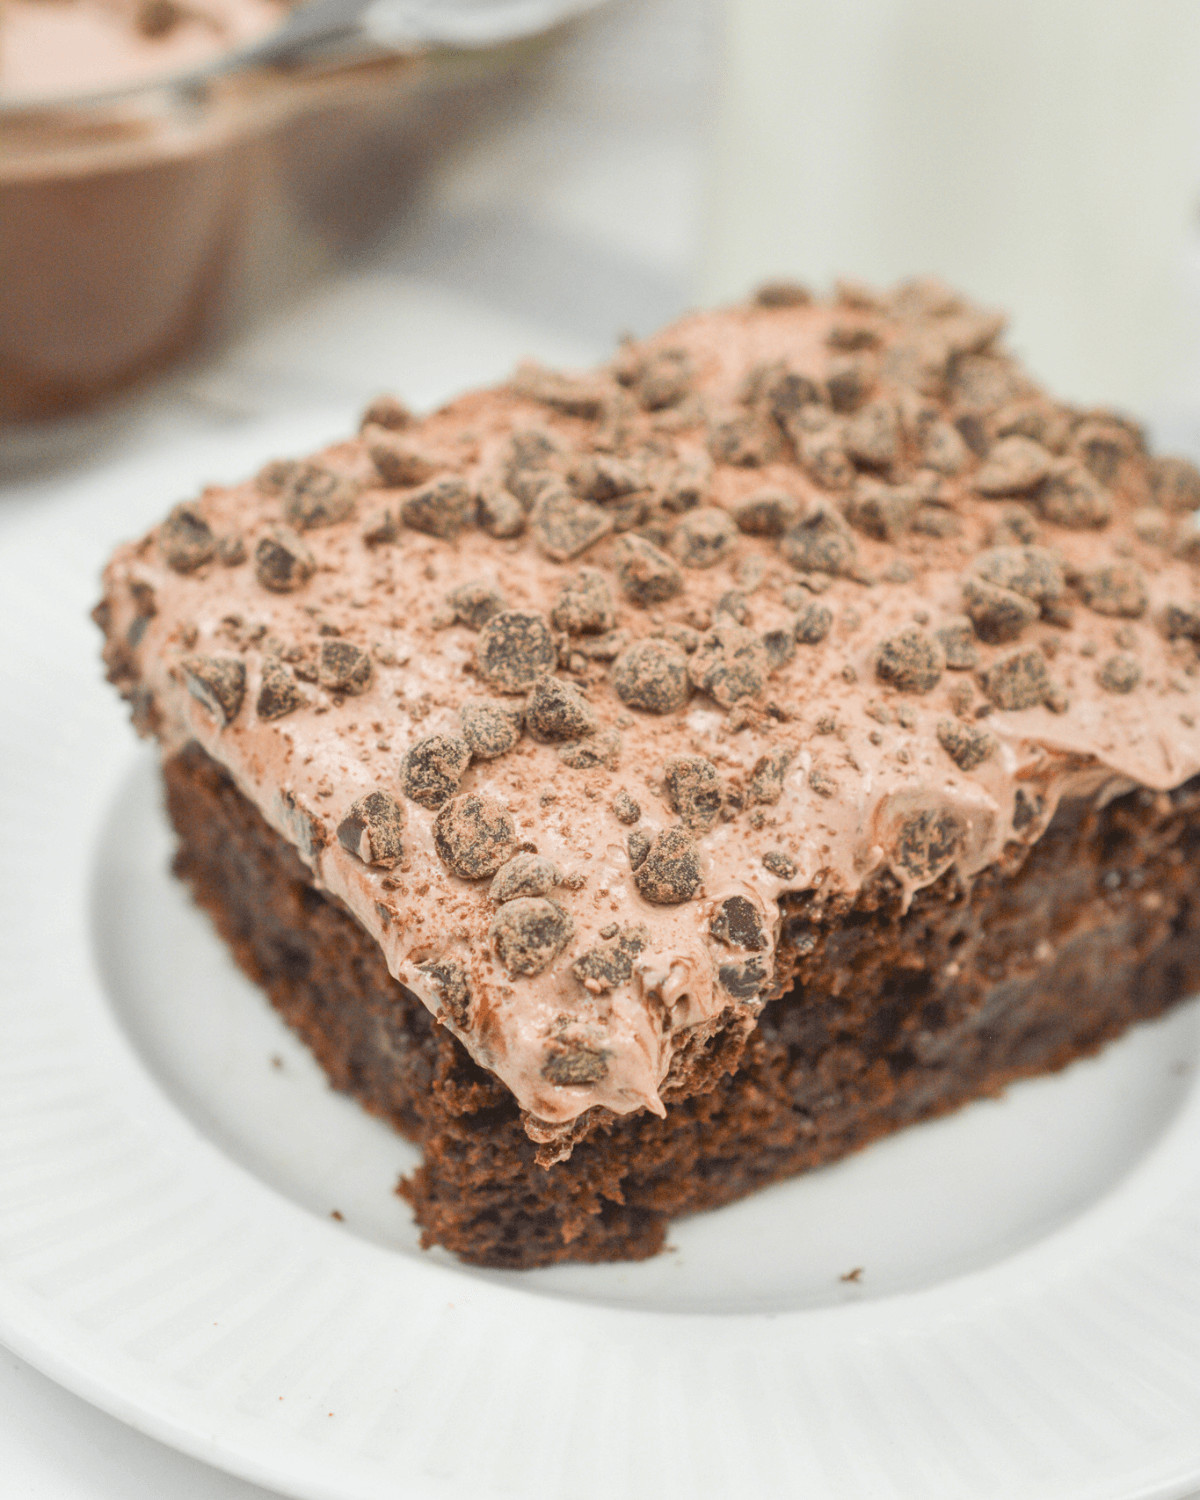 A square of chocolate cake with chocolate chips on top.